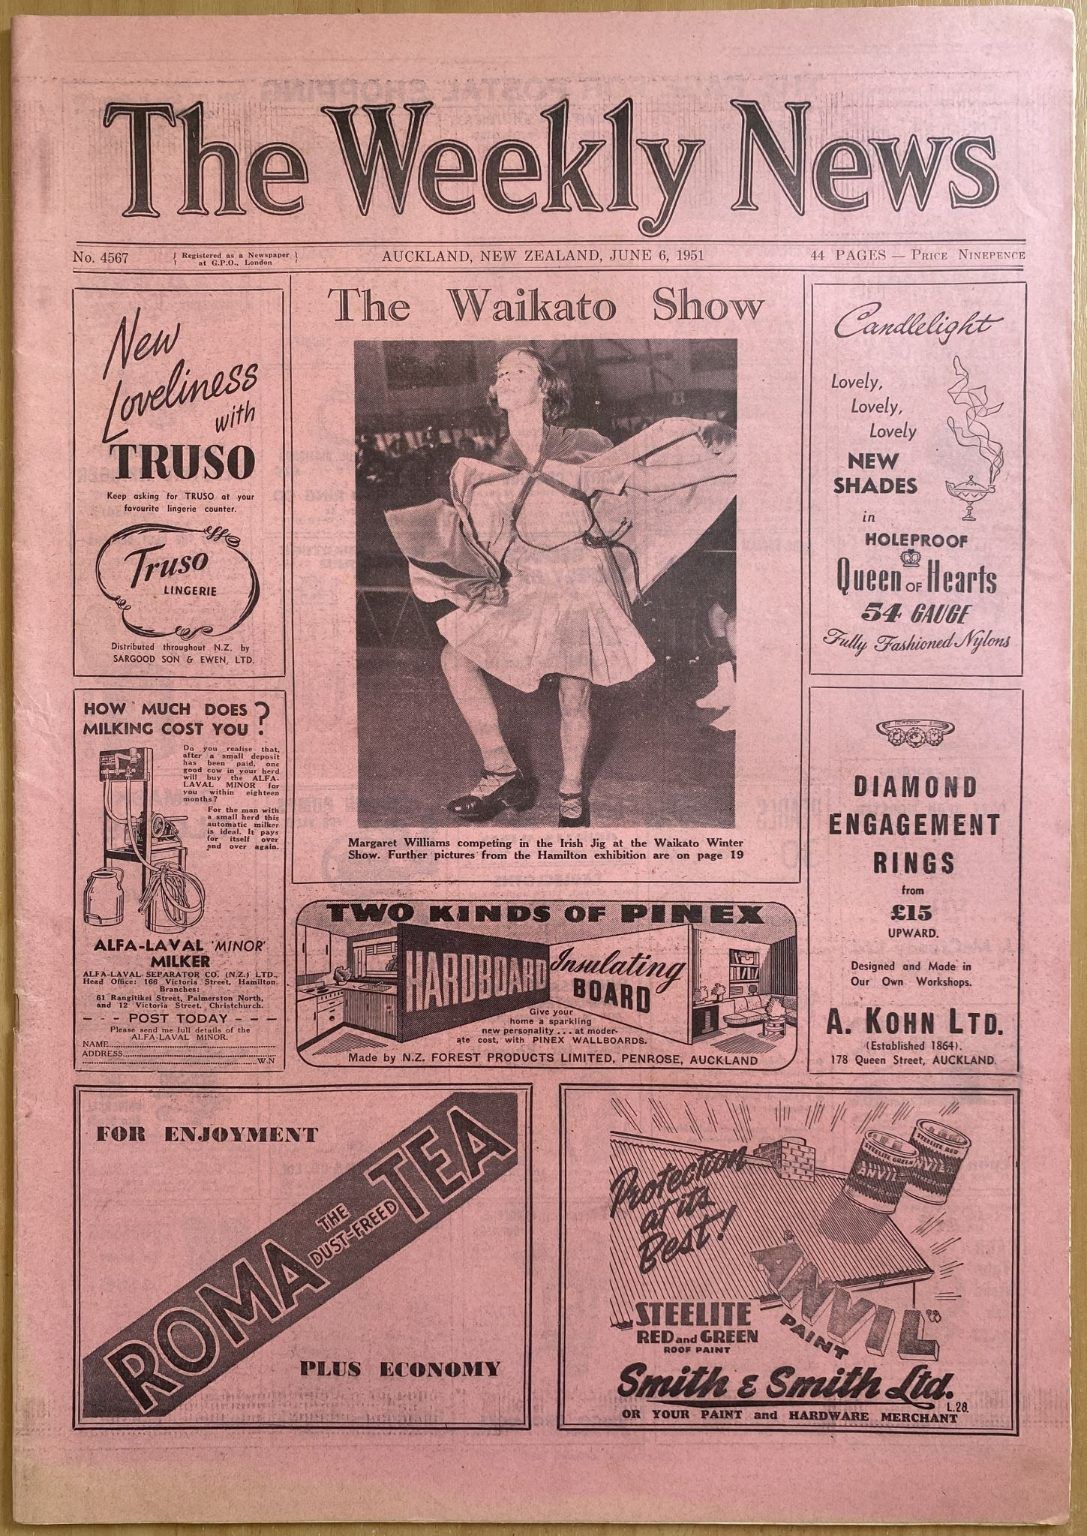 OLD NEWSPAPER: The Weekly News, No. 4567, 6 June 1951